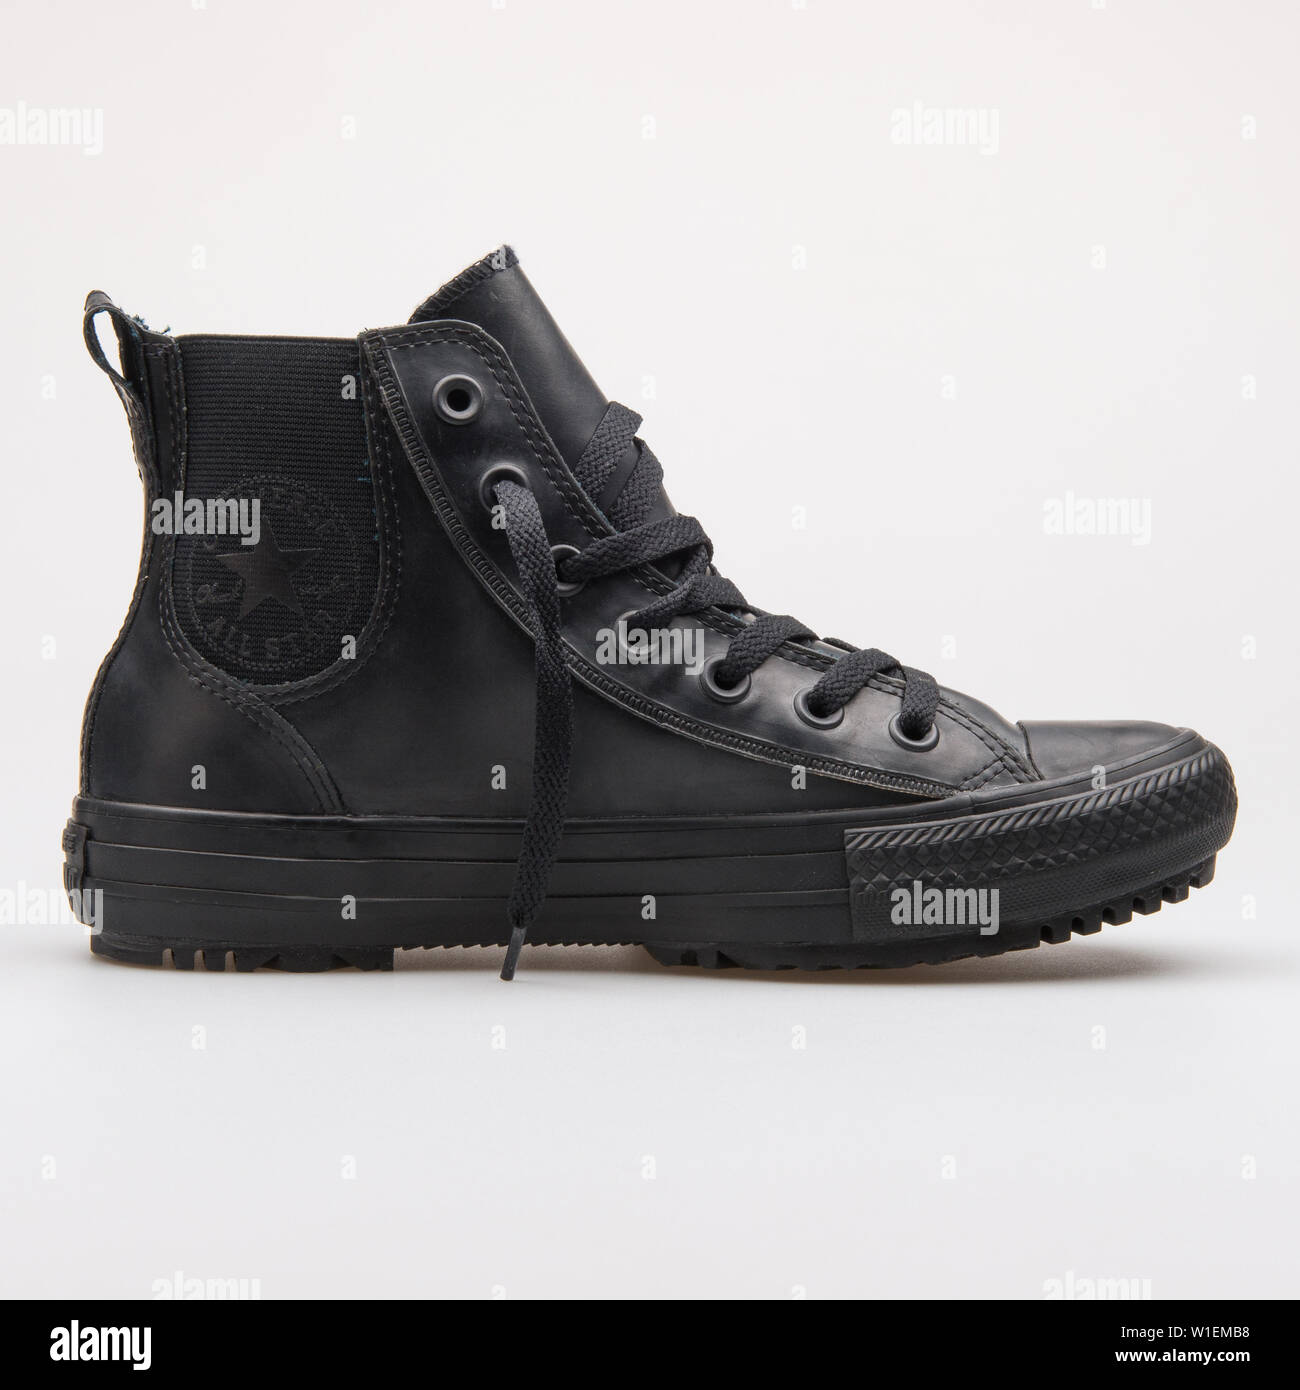 VIENNA, AUSTRIA - AUGUST 28, 2017: Converse Chuck Taylor All Star Chelsea Boot  Rubber High black sneaker on white background Stock Photo - Alamy